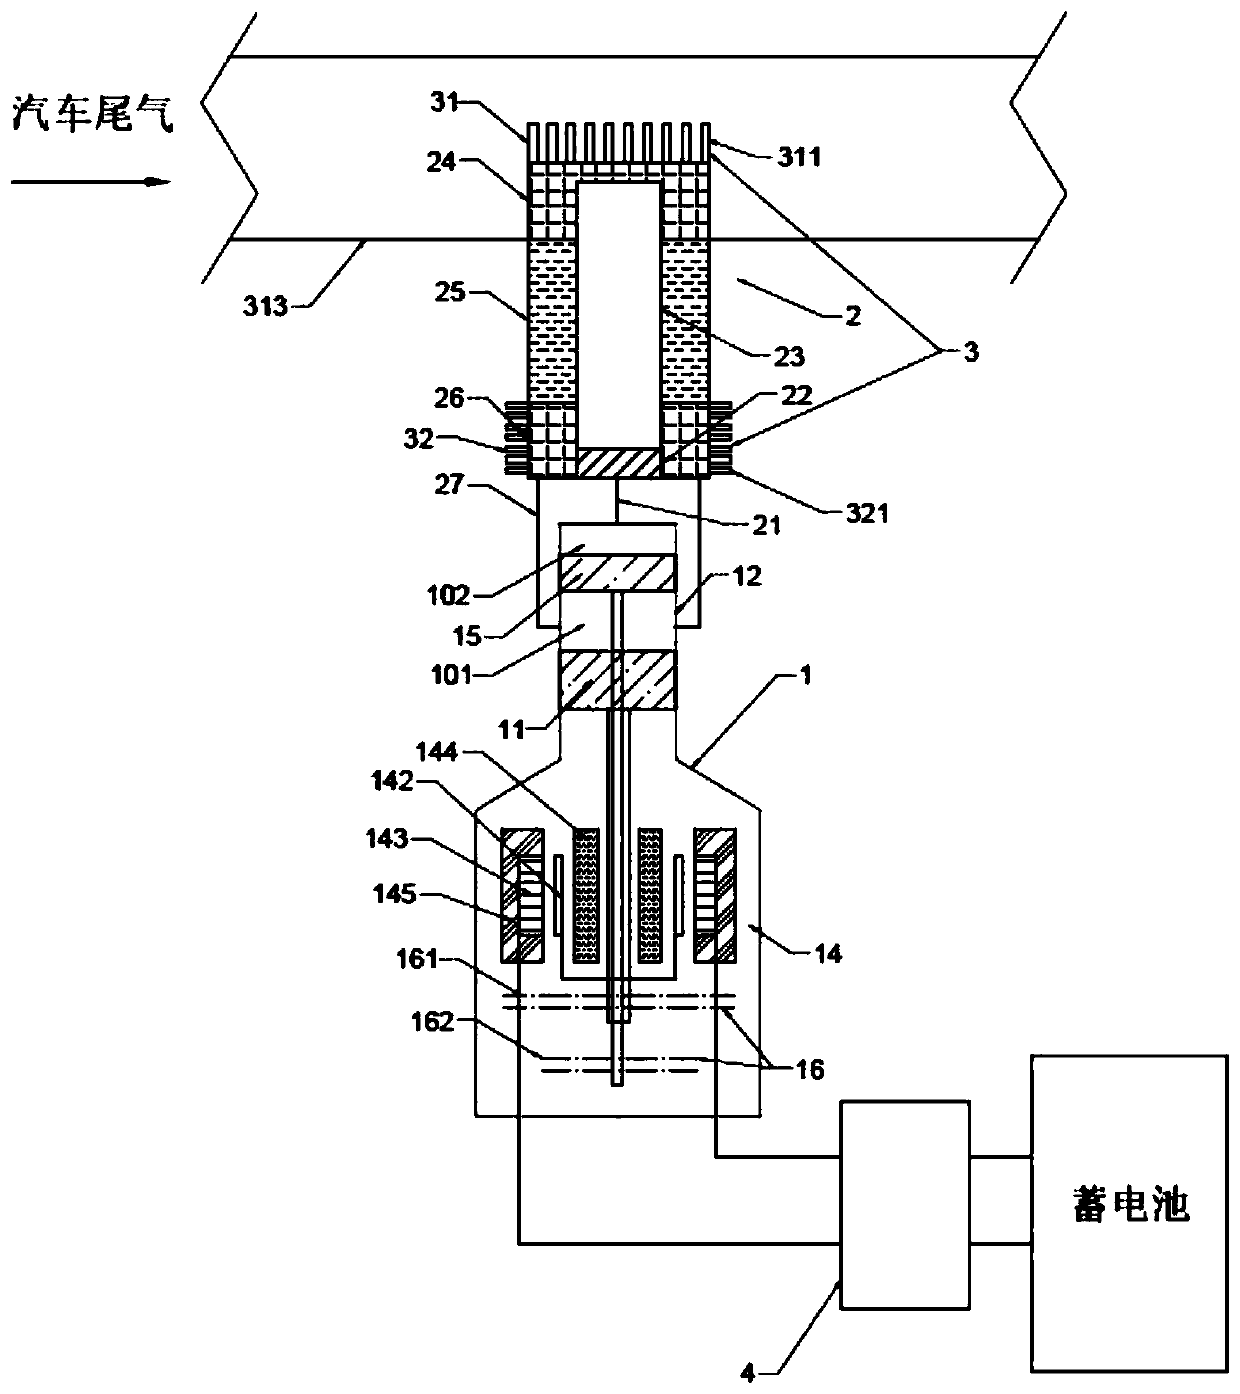 Automobile exhaust waste heat recycling and charging device based on pulse tube generator